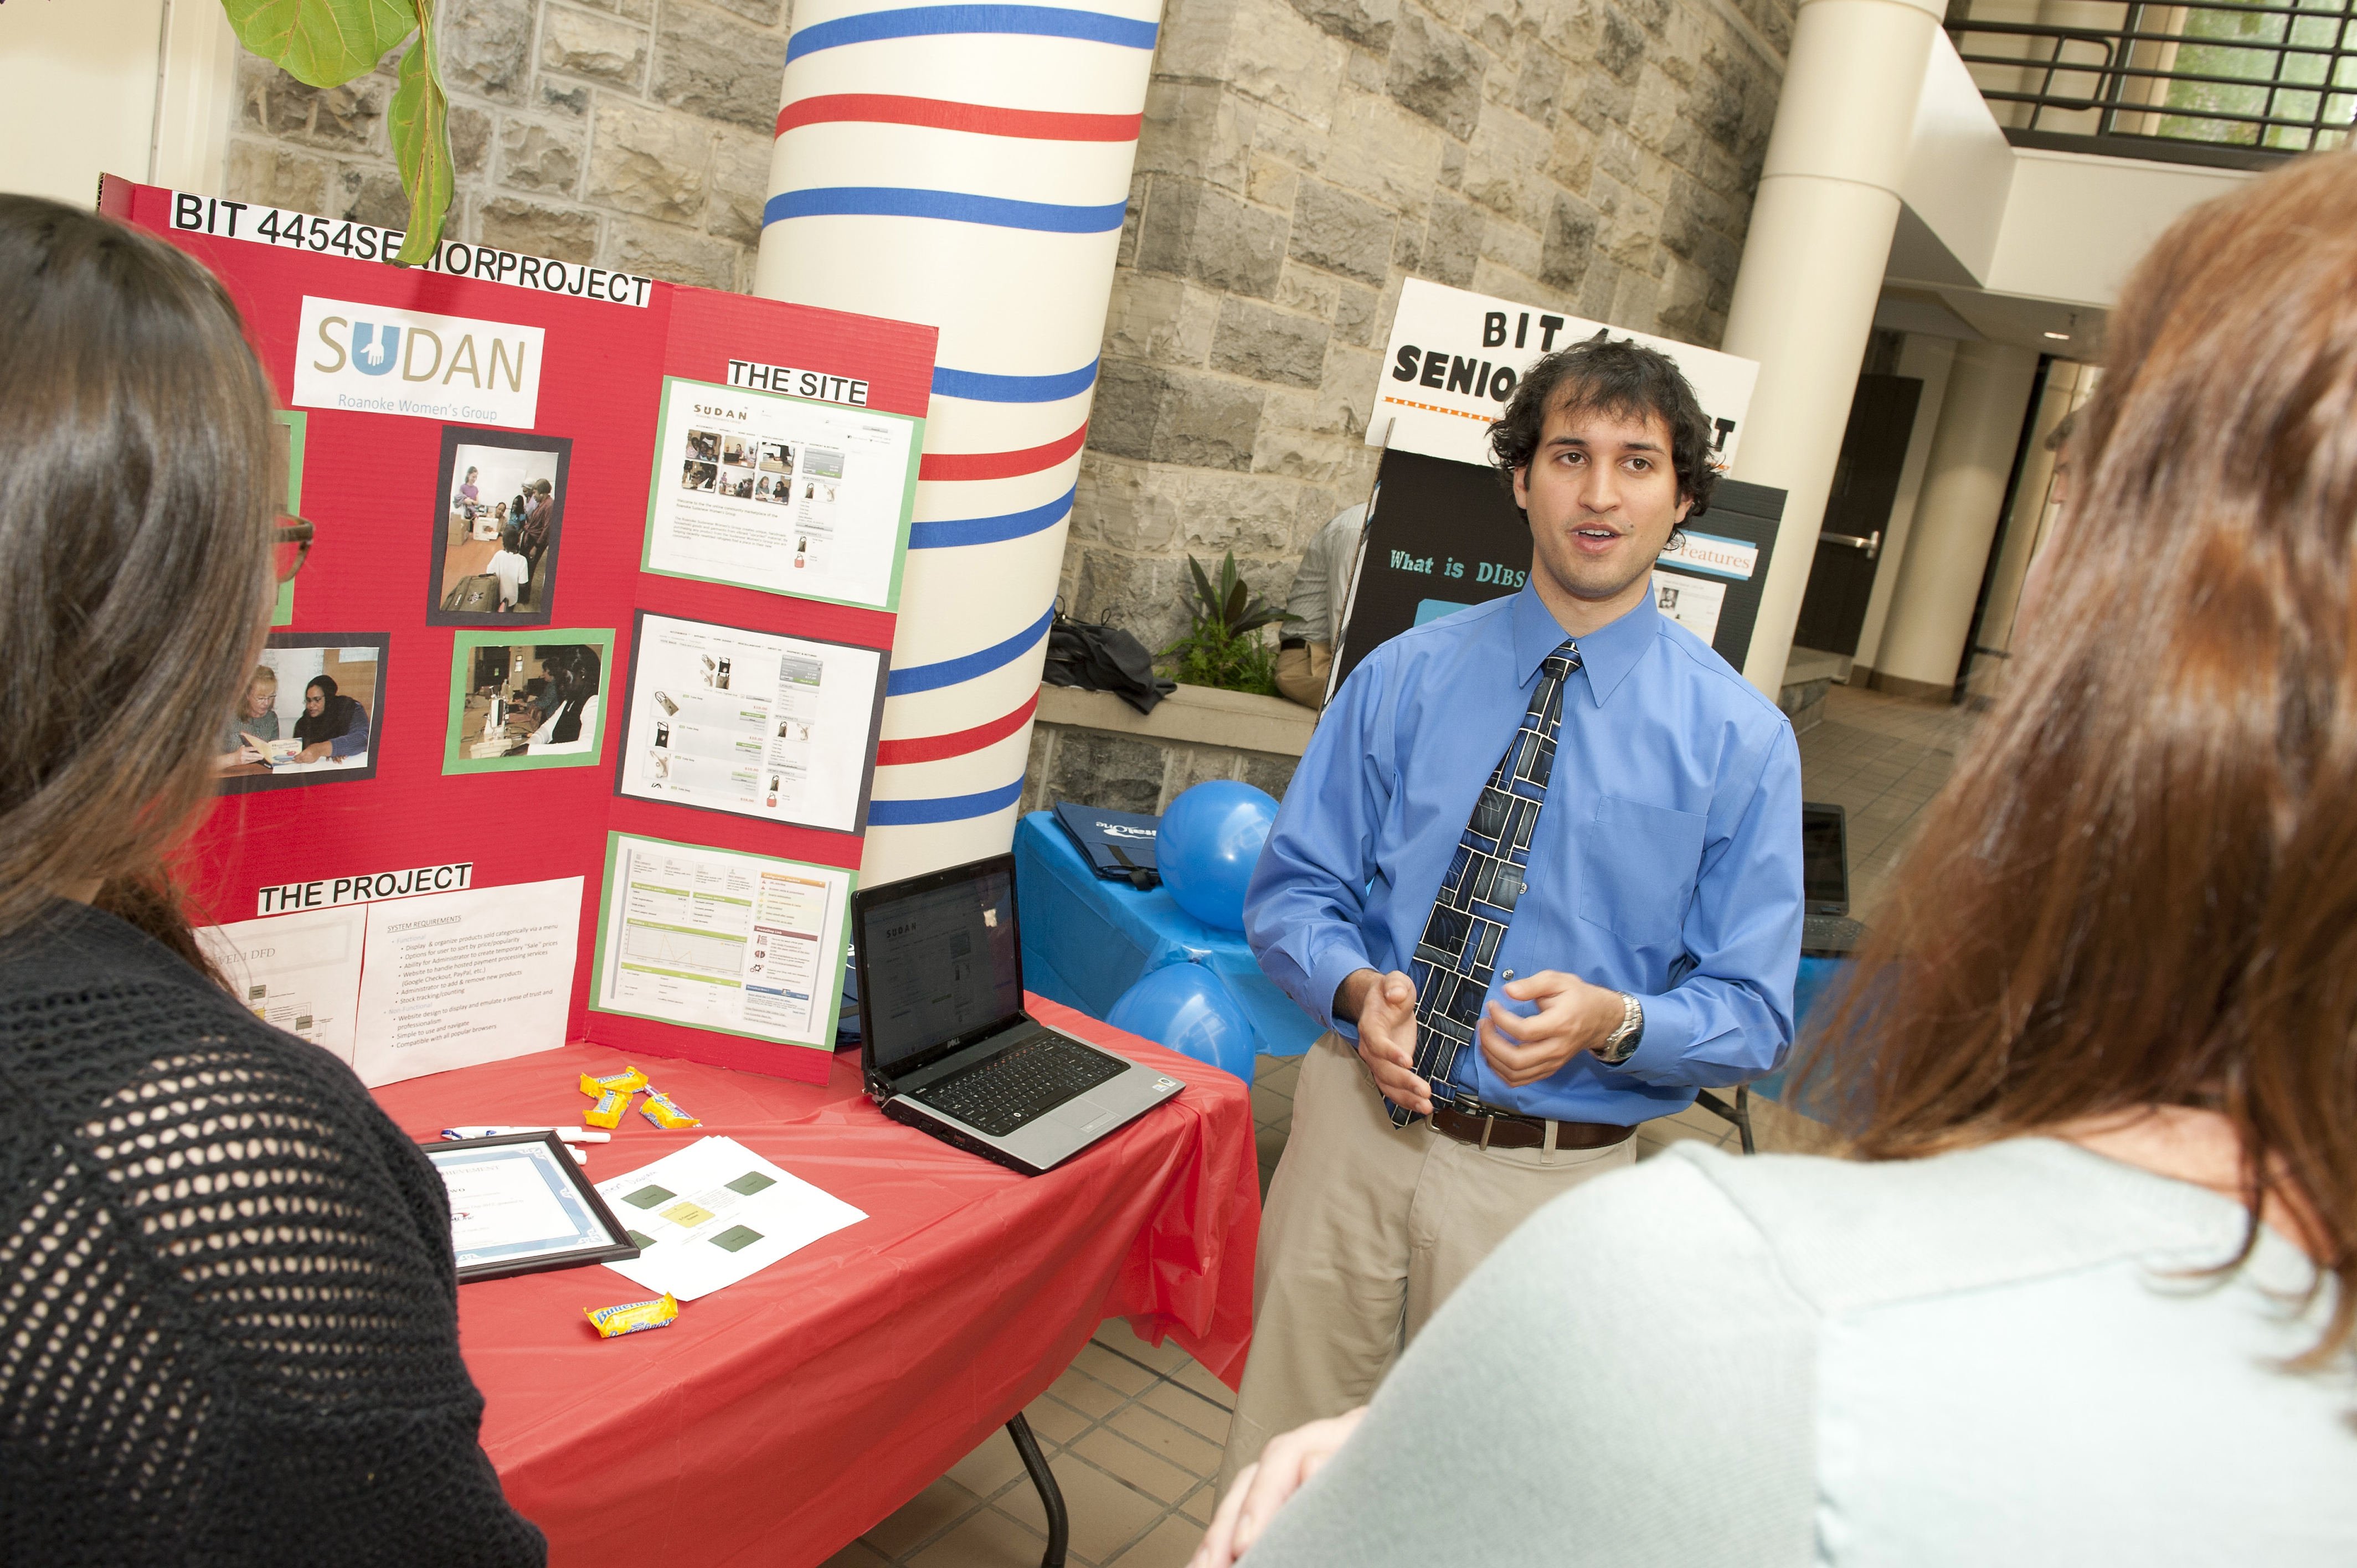 Pamplin student Elon Daghigh describes his team's senior class project to a visitor.